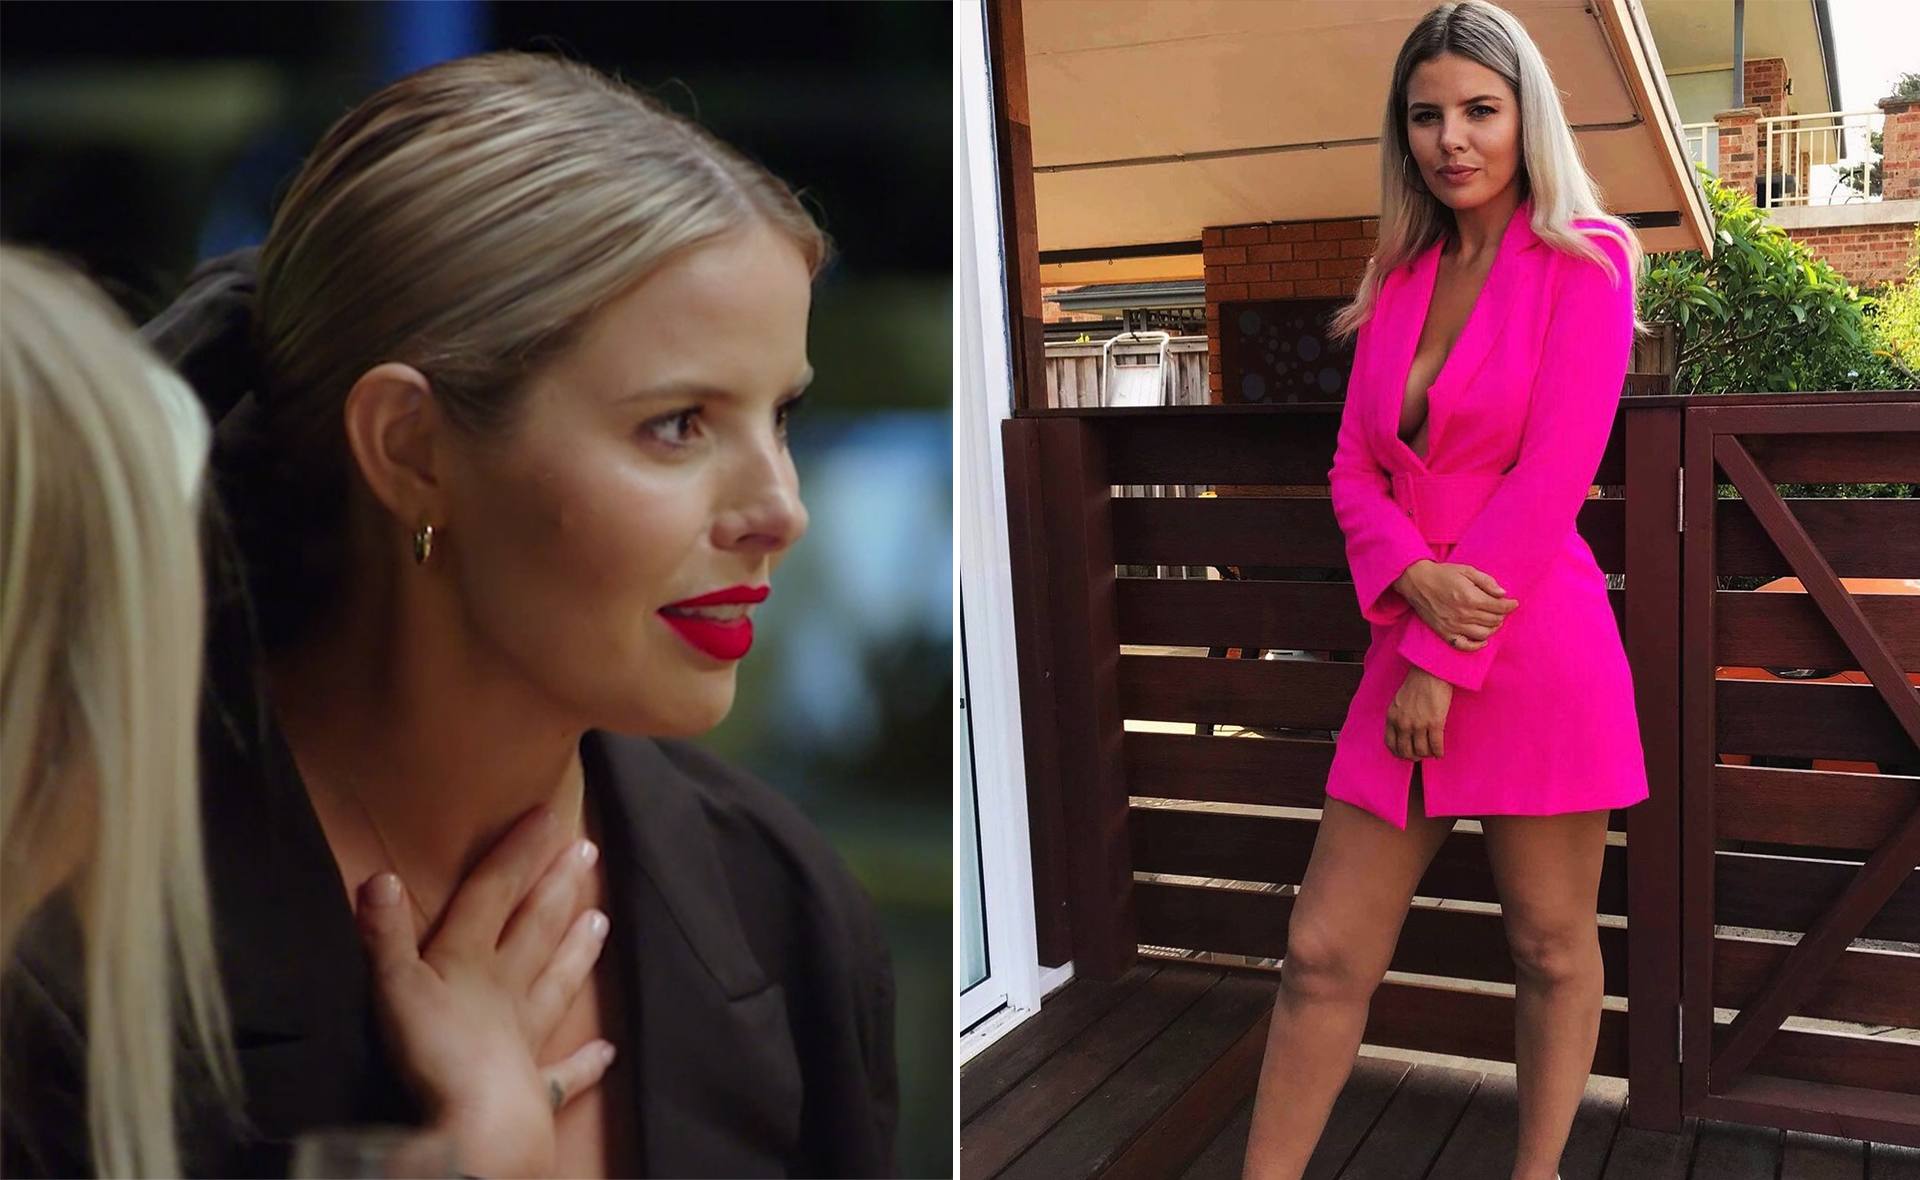 She started as a fan favourite but MAFS’ Olivia Frazer is starting to show another, not-so-sweet side